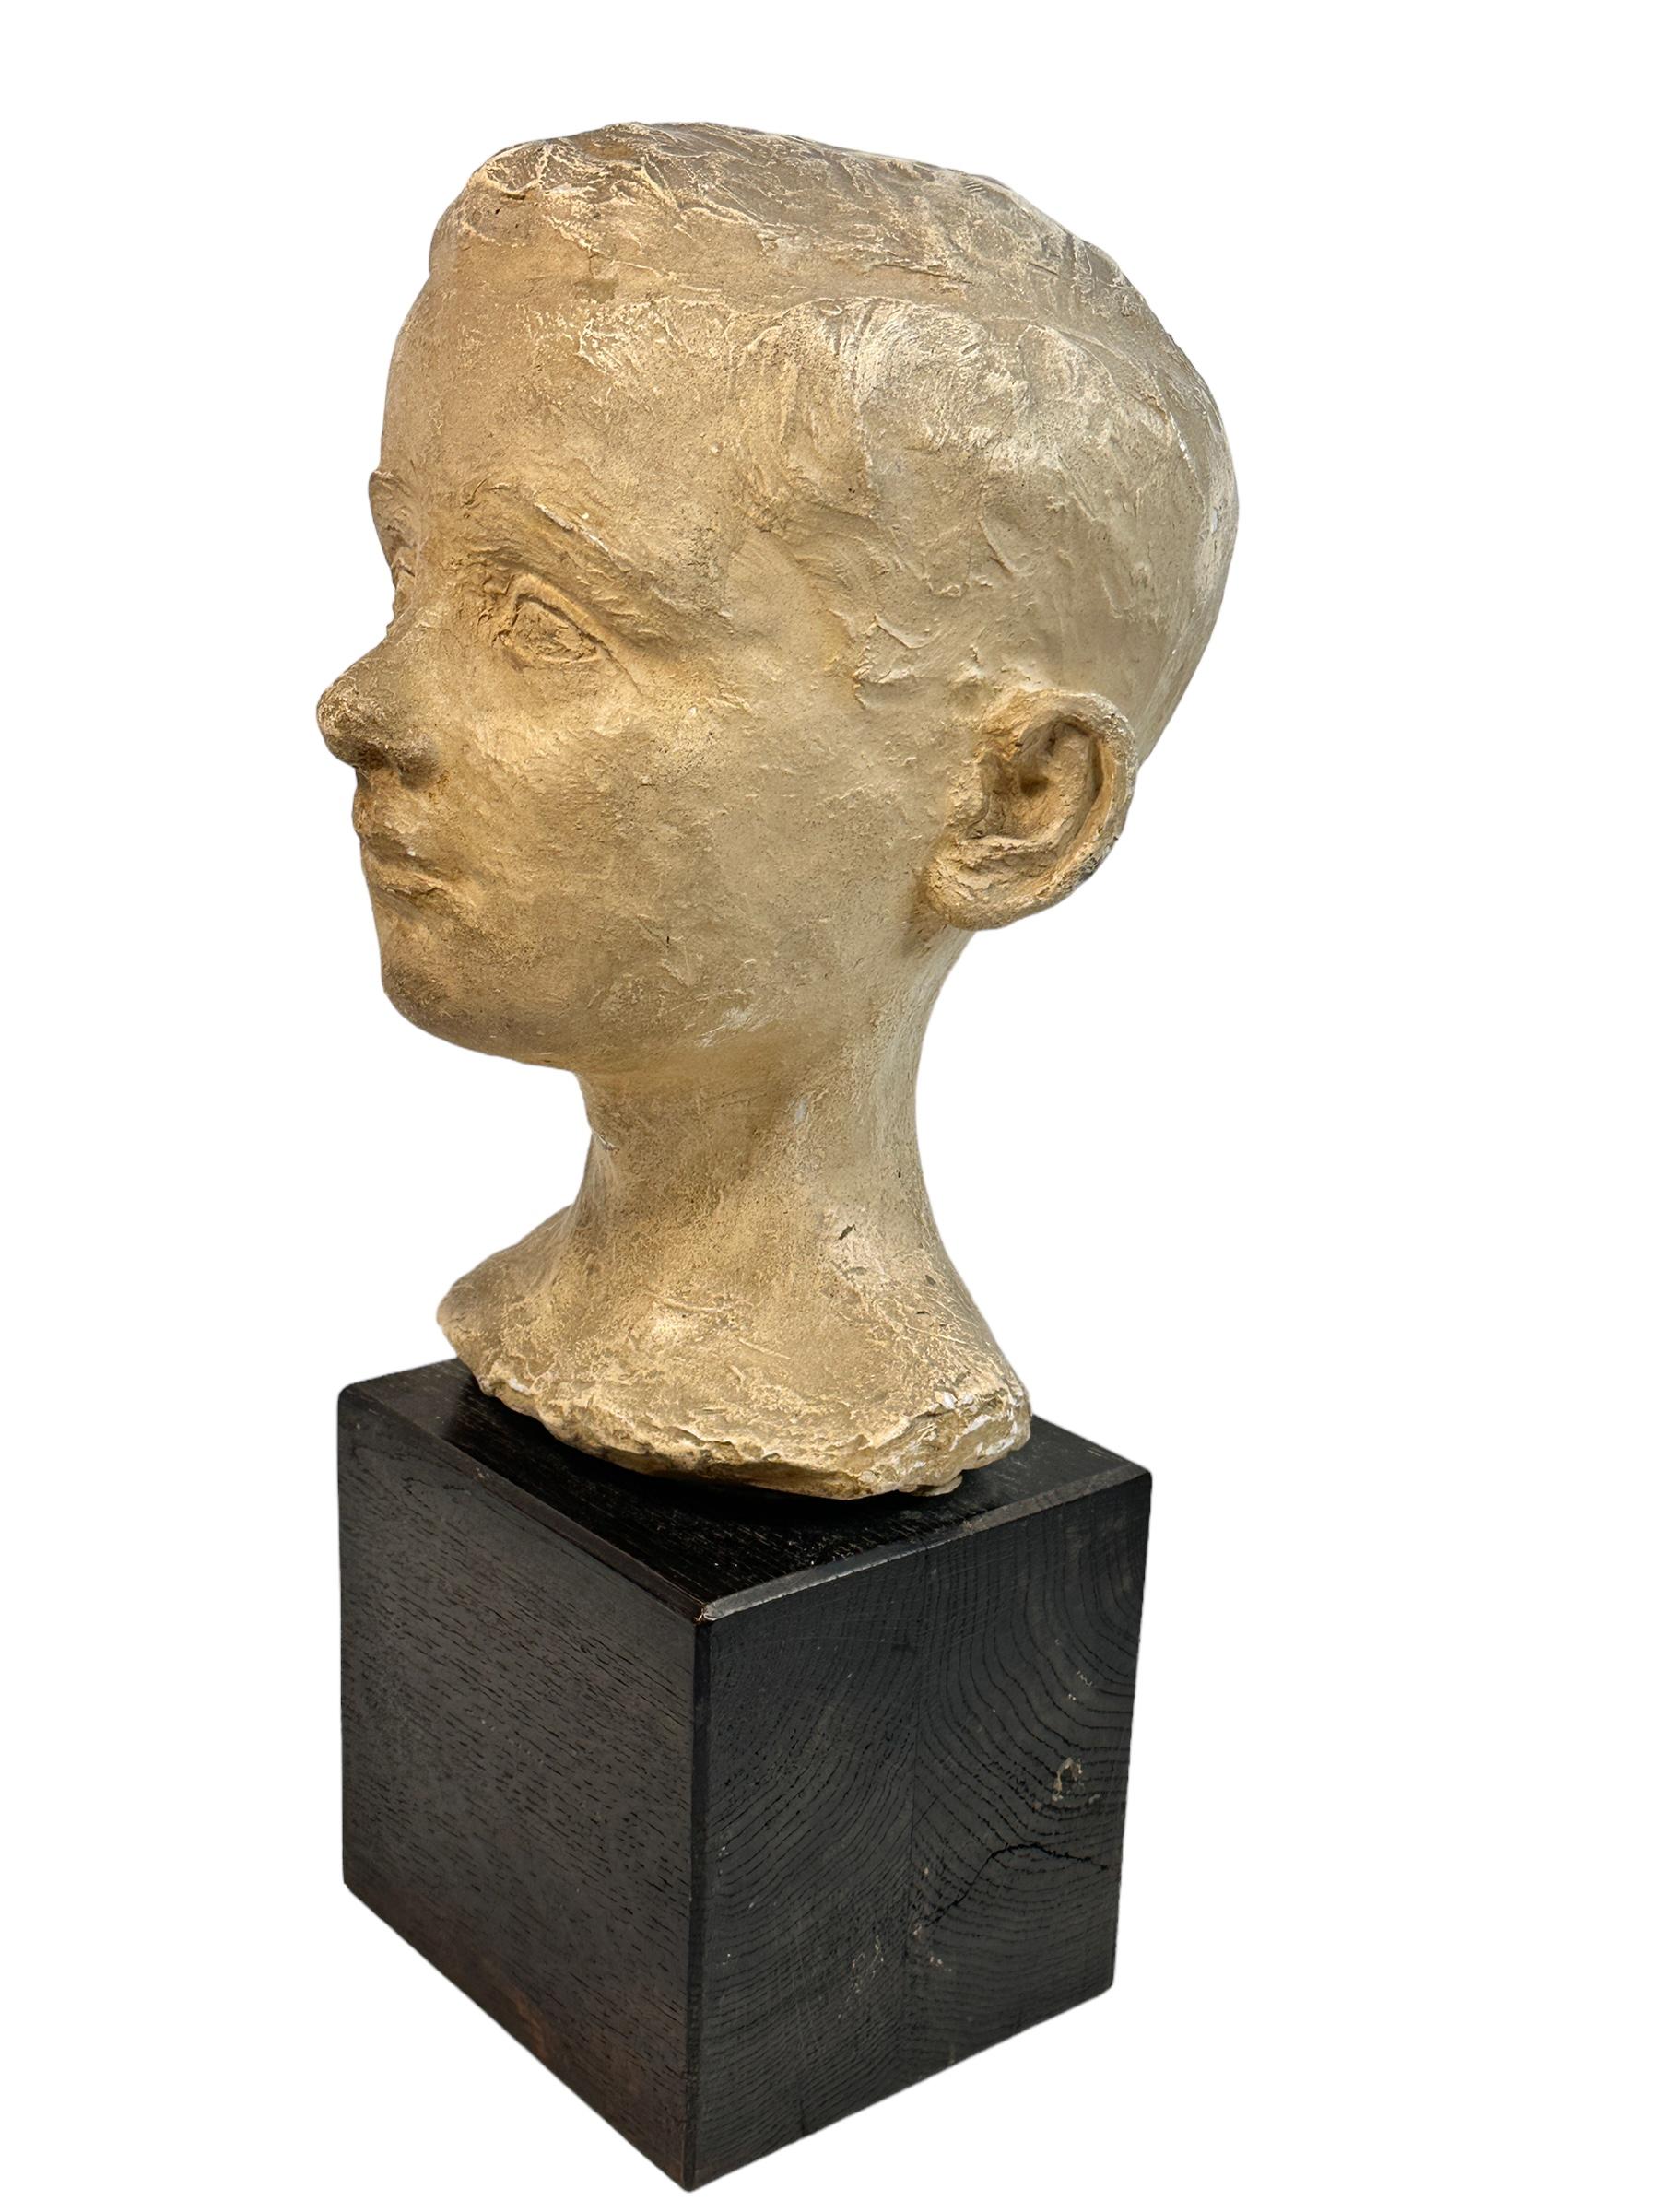 Beautiful mid century modern white plaster boys head bust. Bust with lots of patina. Plaster on a wooden base. A nice addition in every living room. Found at an estate sale in Nuremberg, Germany.
Signed by artist at the wooden base and dated. Can